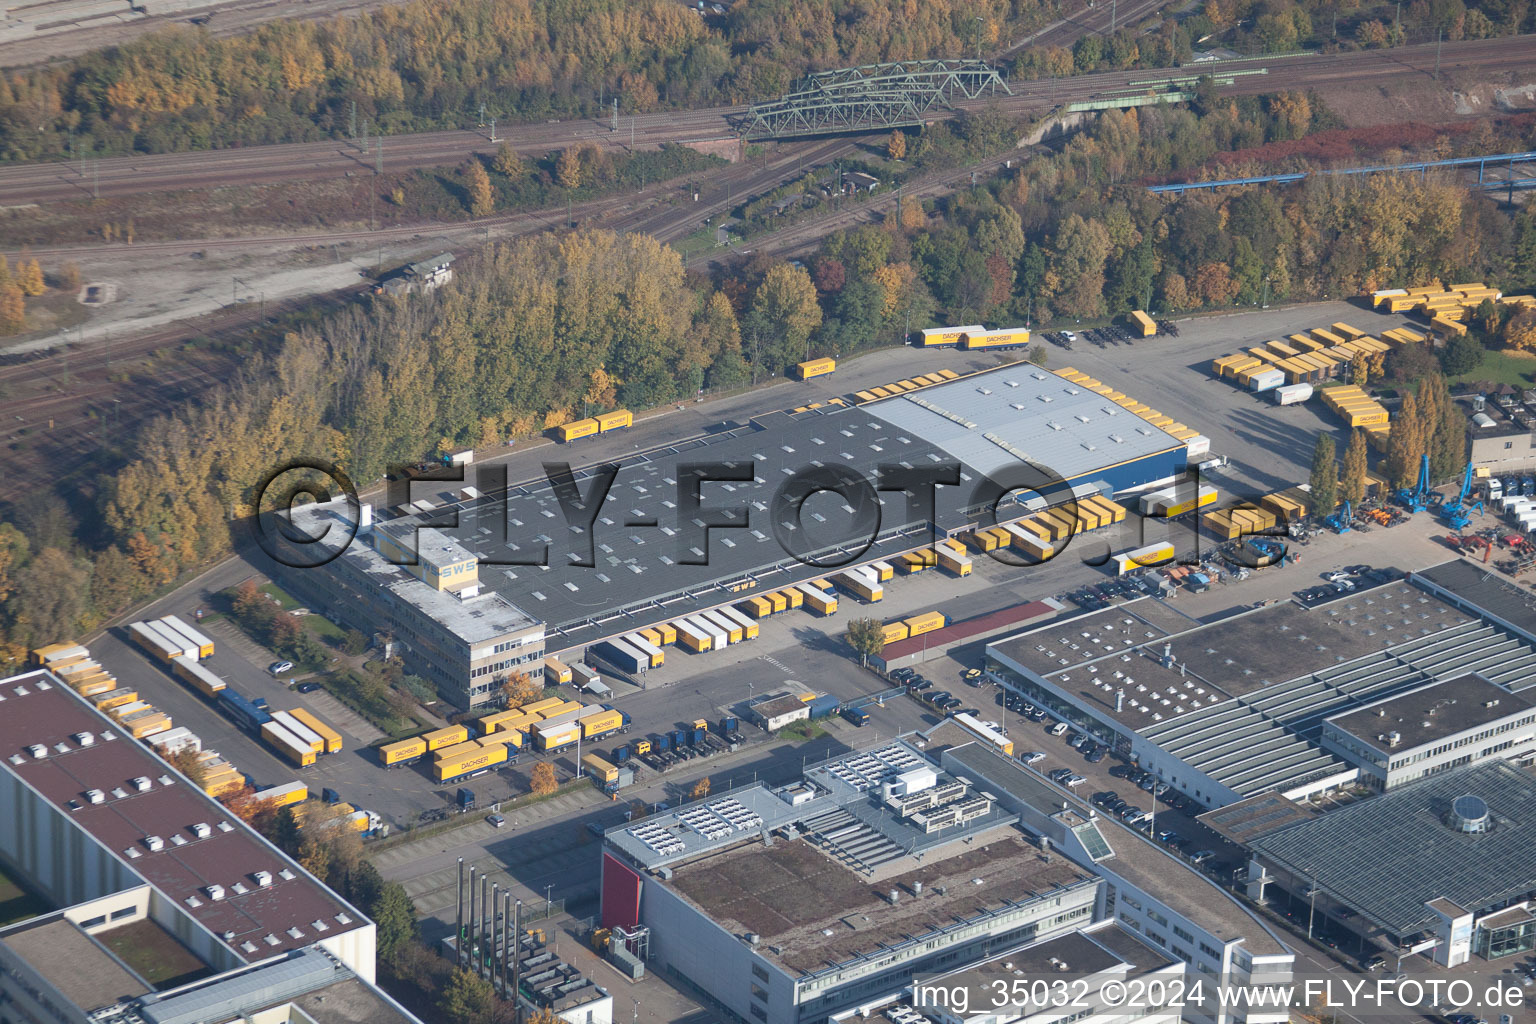 Warehouses and forwarding building SWS-Speditions-GmbH, Otto-street in the district Durlach in Karlsruhe in the state Baden-Wurttemberg out of the air